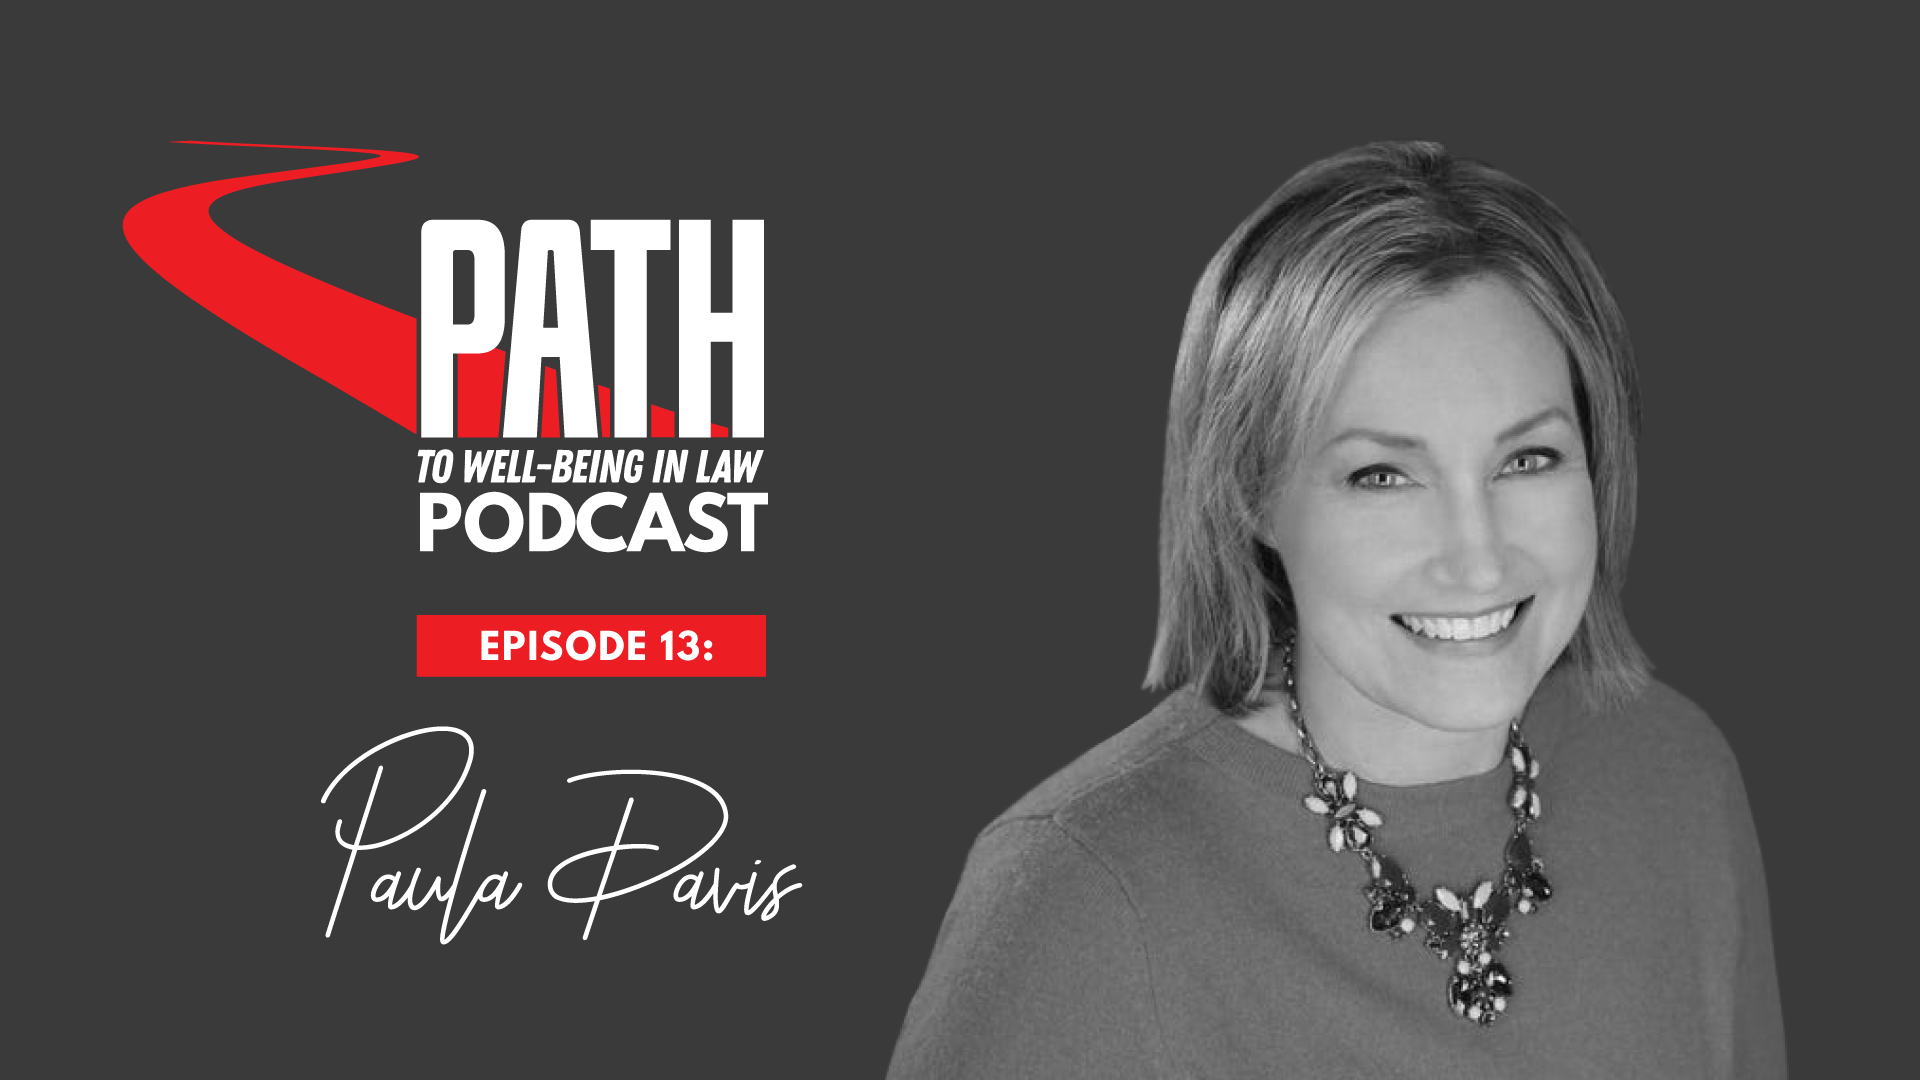 Path To Well-Being In Law: Episode 13 - Paula Davis